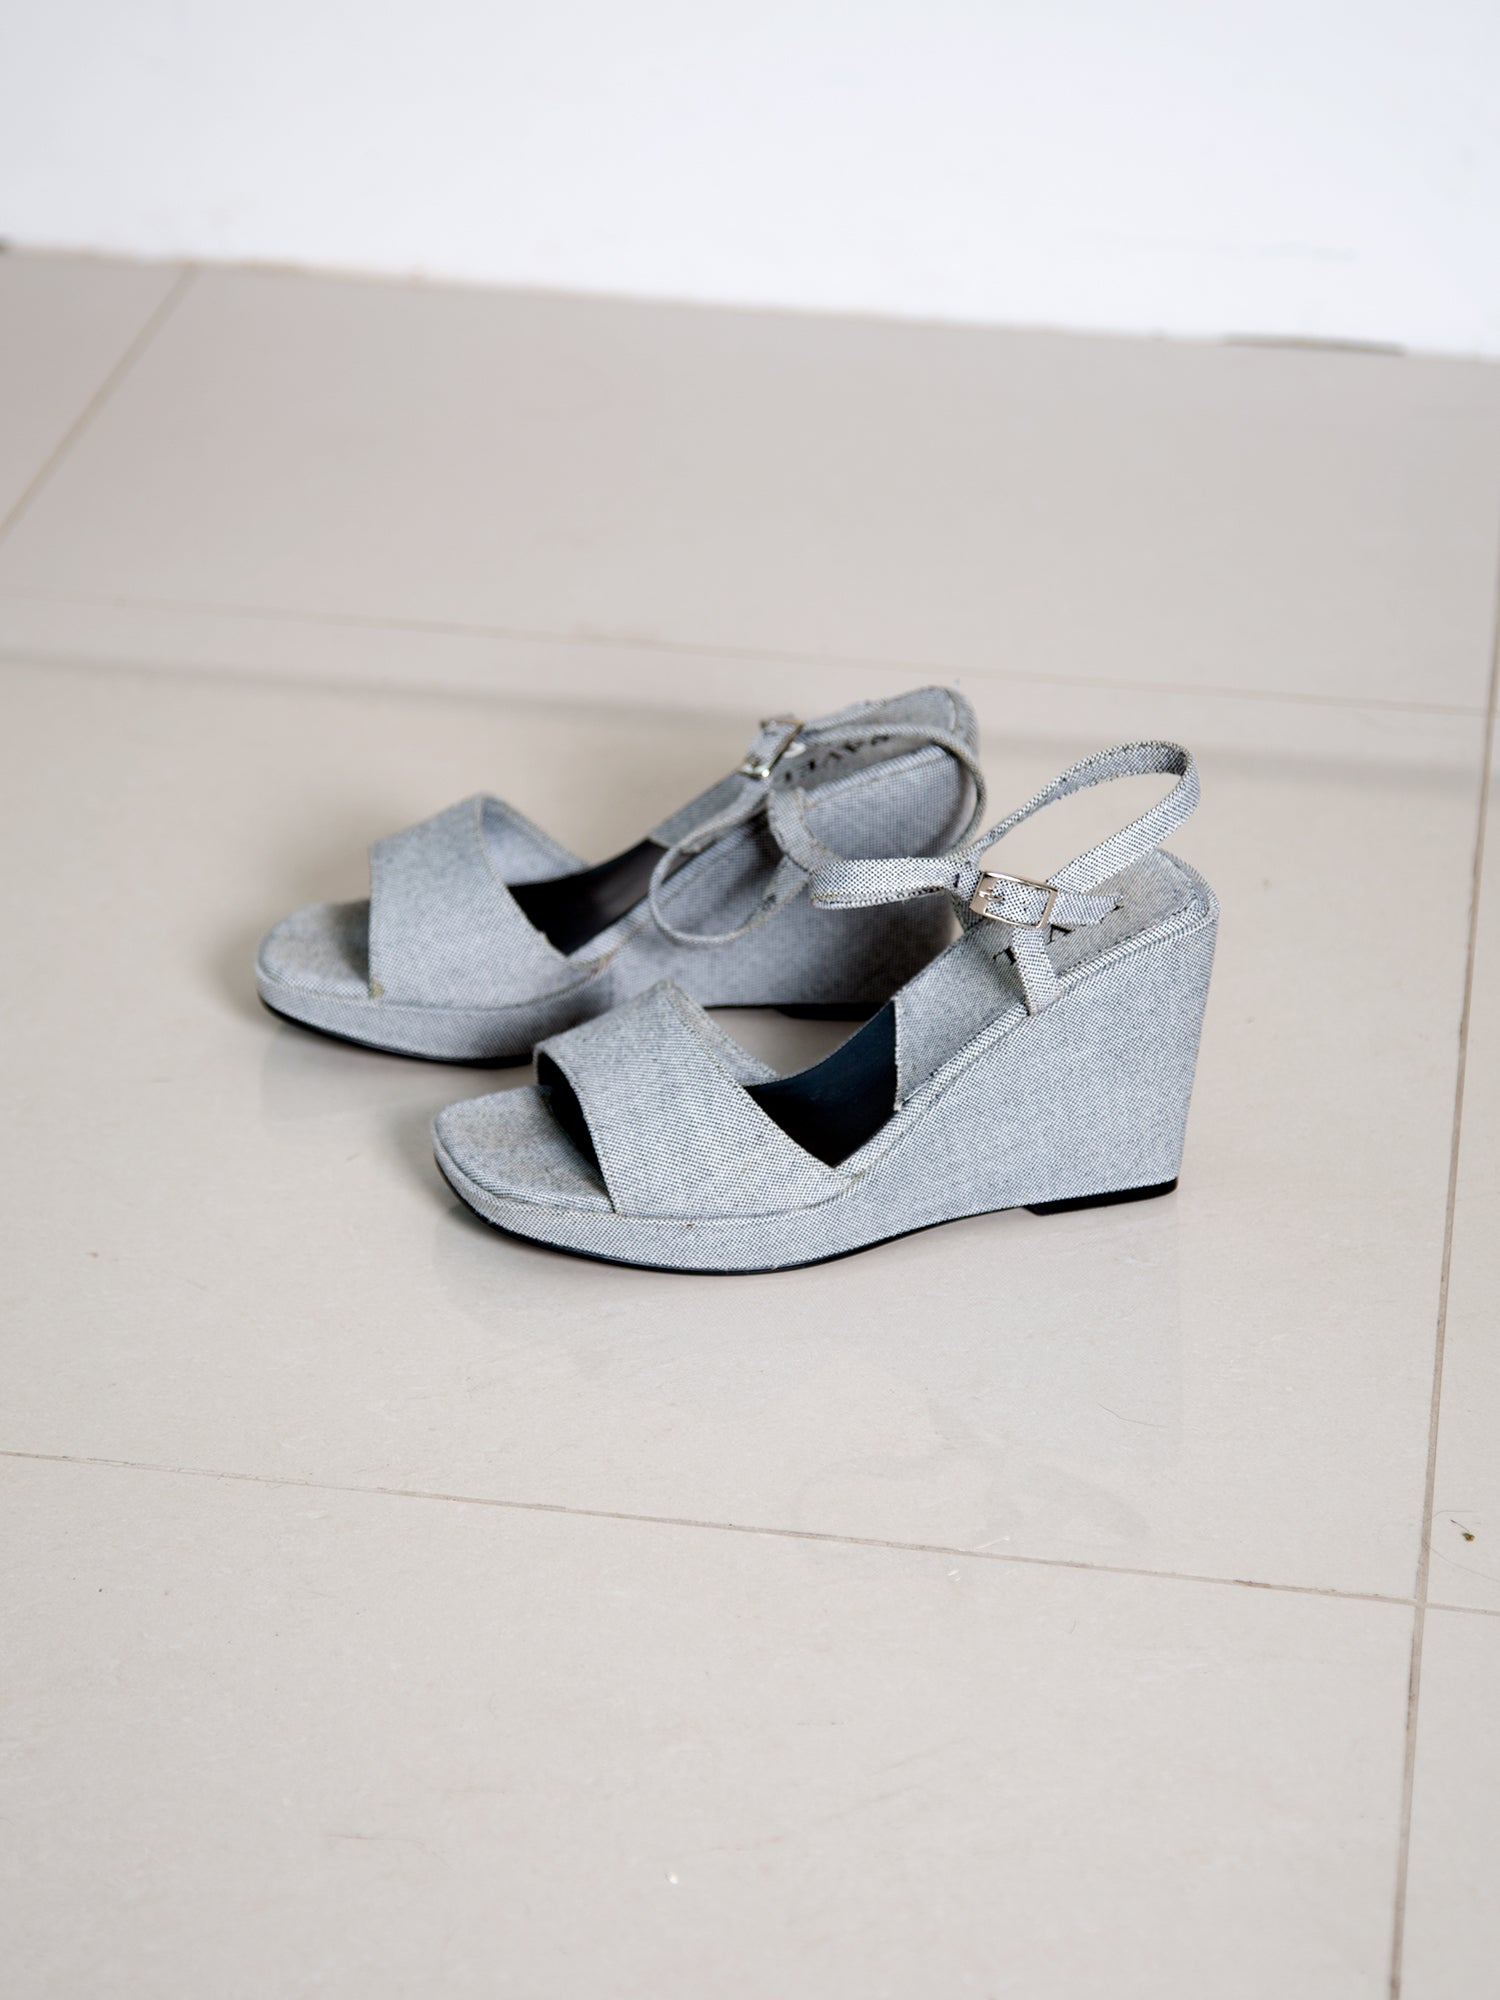 A pair of vintage 1990s light-blue wedge sandals